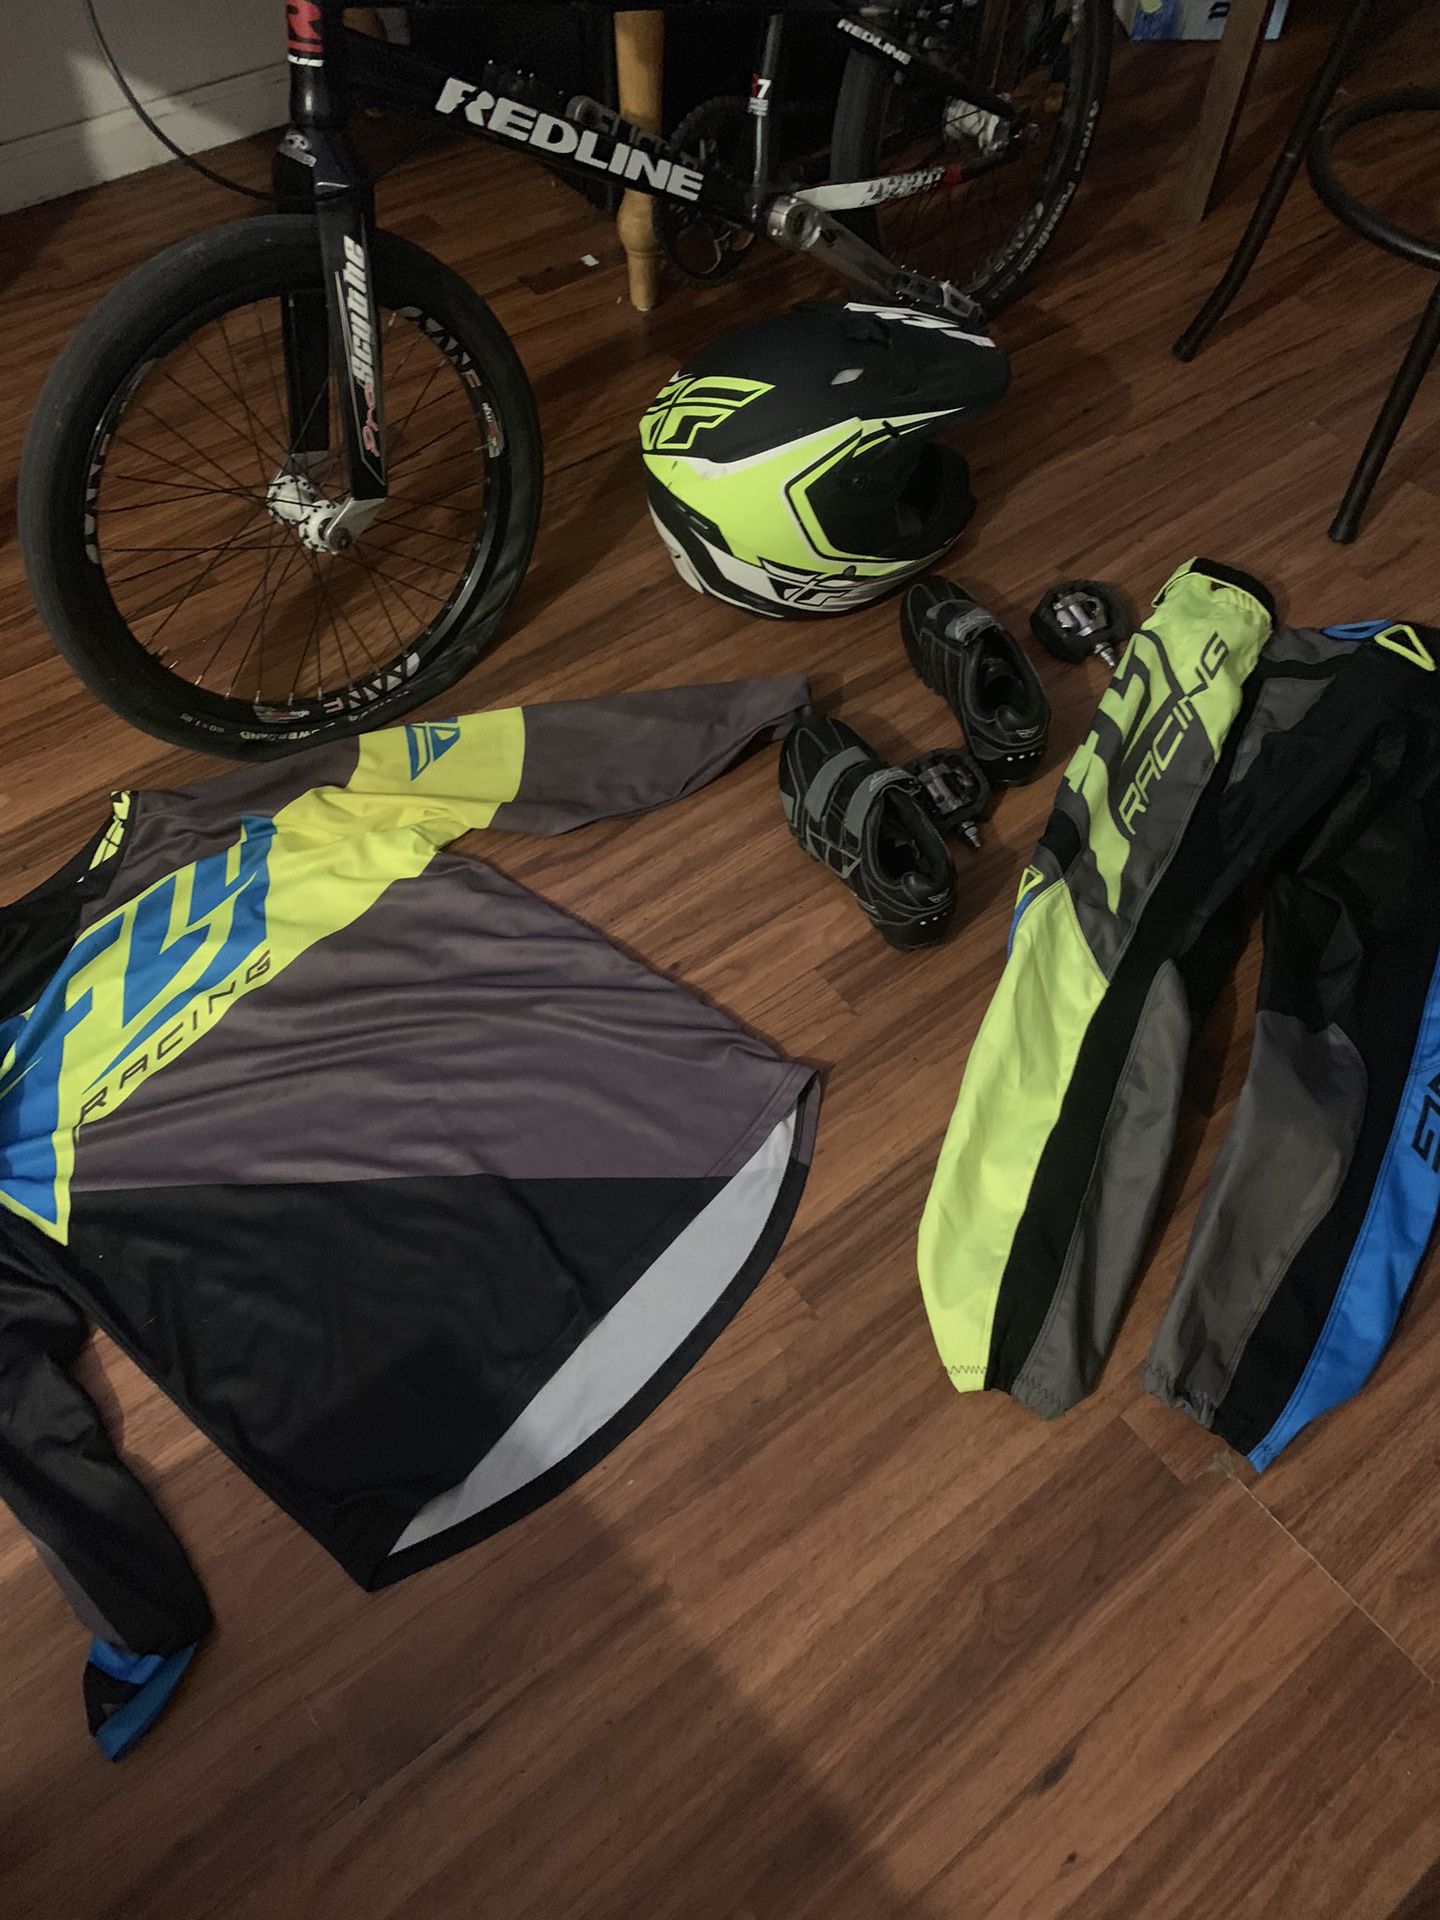 BMX bundle deal! Redline Flight Pro XL like new ,Dx shimano pedals, Fly Racing shoes ,shirt and pants / everything is pretty much new I barely used t